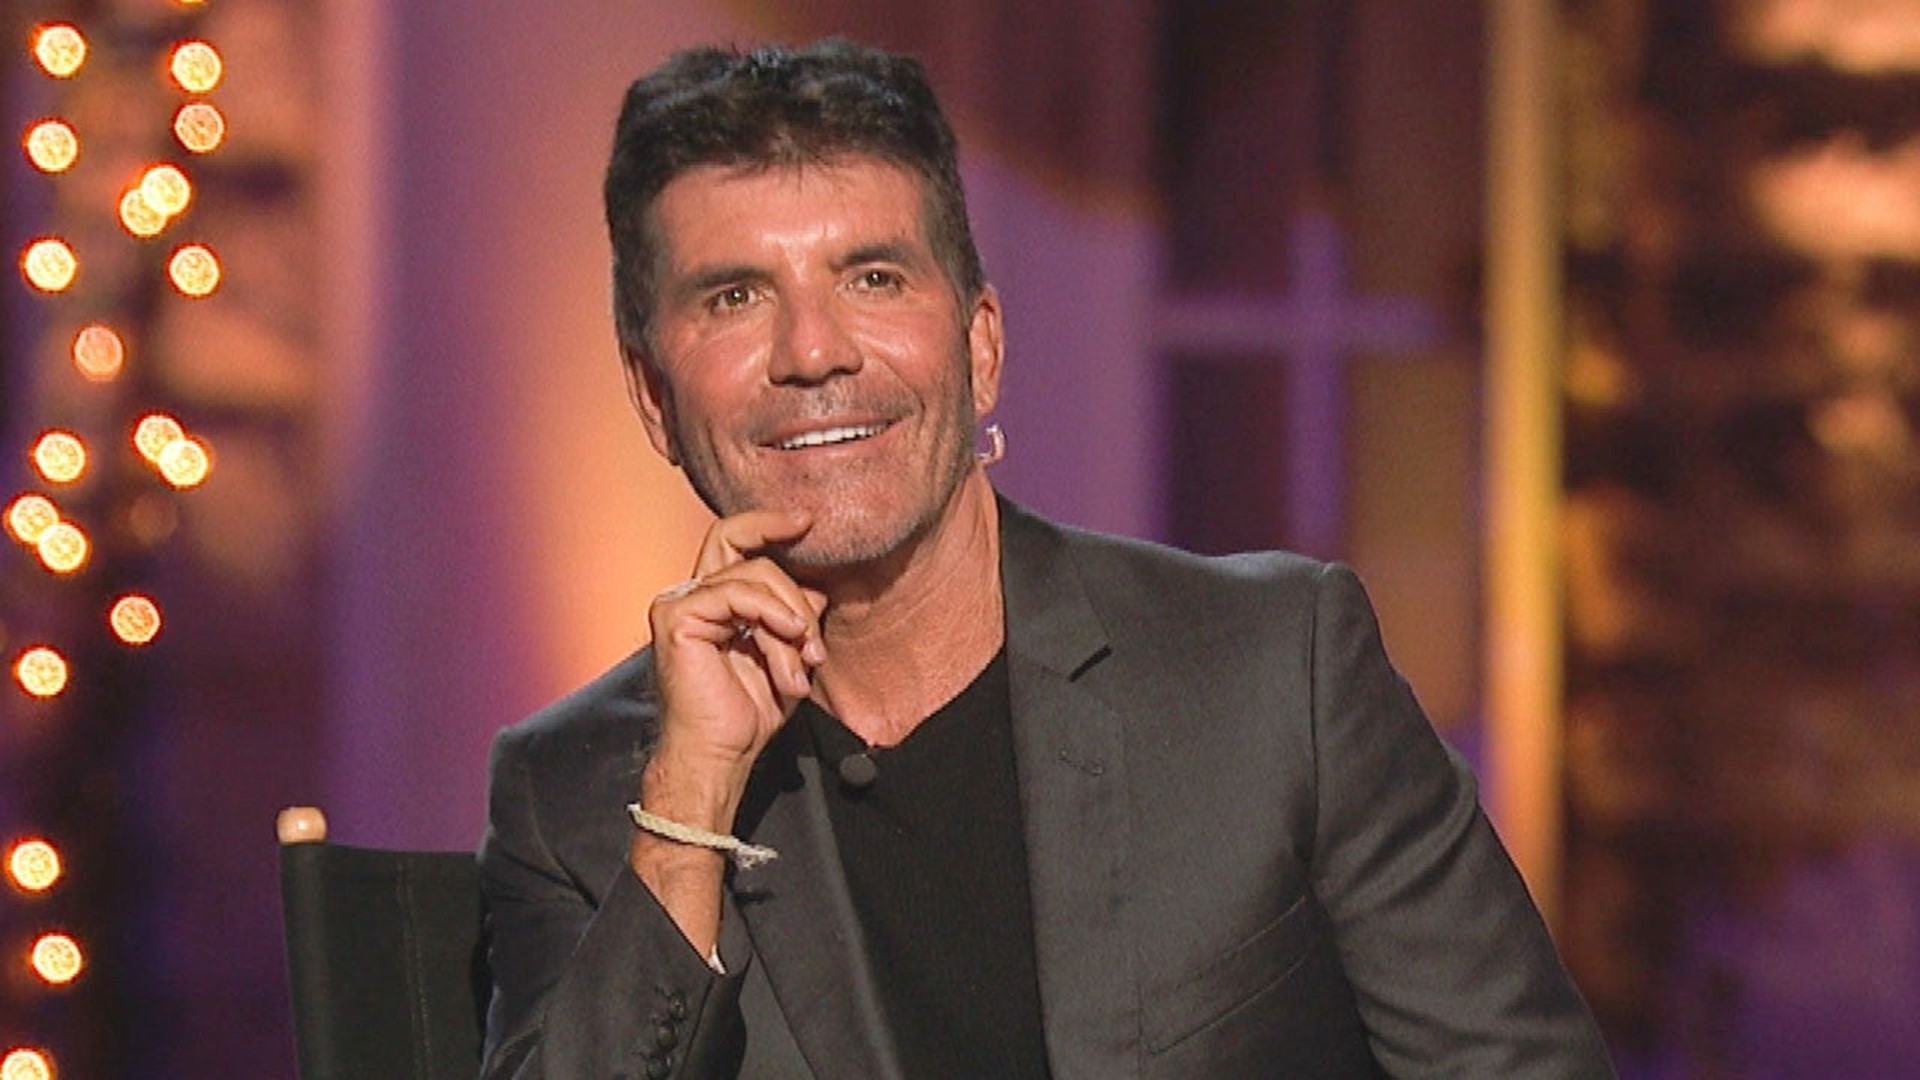 Simon Cowell Gives Updates on Wedding Planning and His Health Following